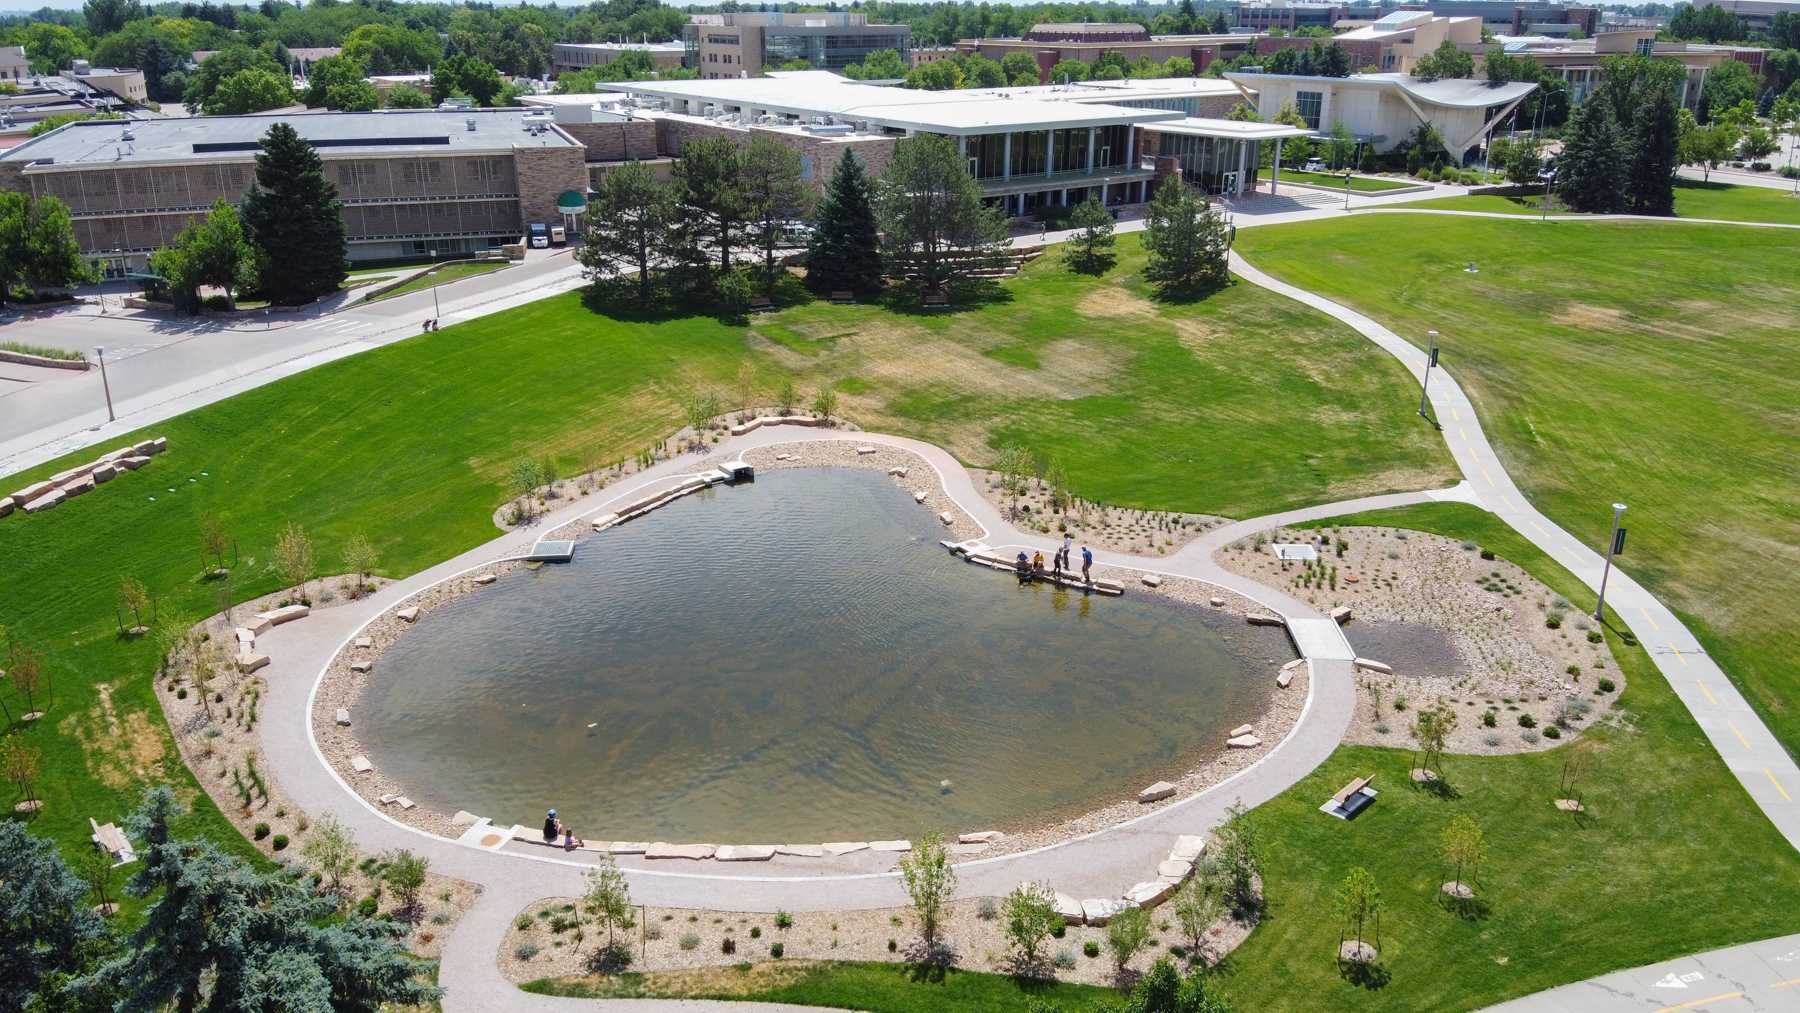 The newly renovated lagoon at Colorado State University.